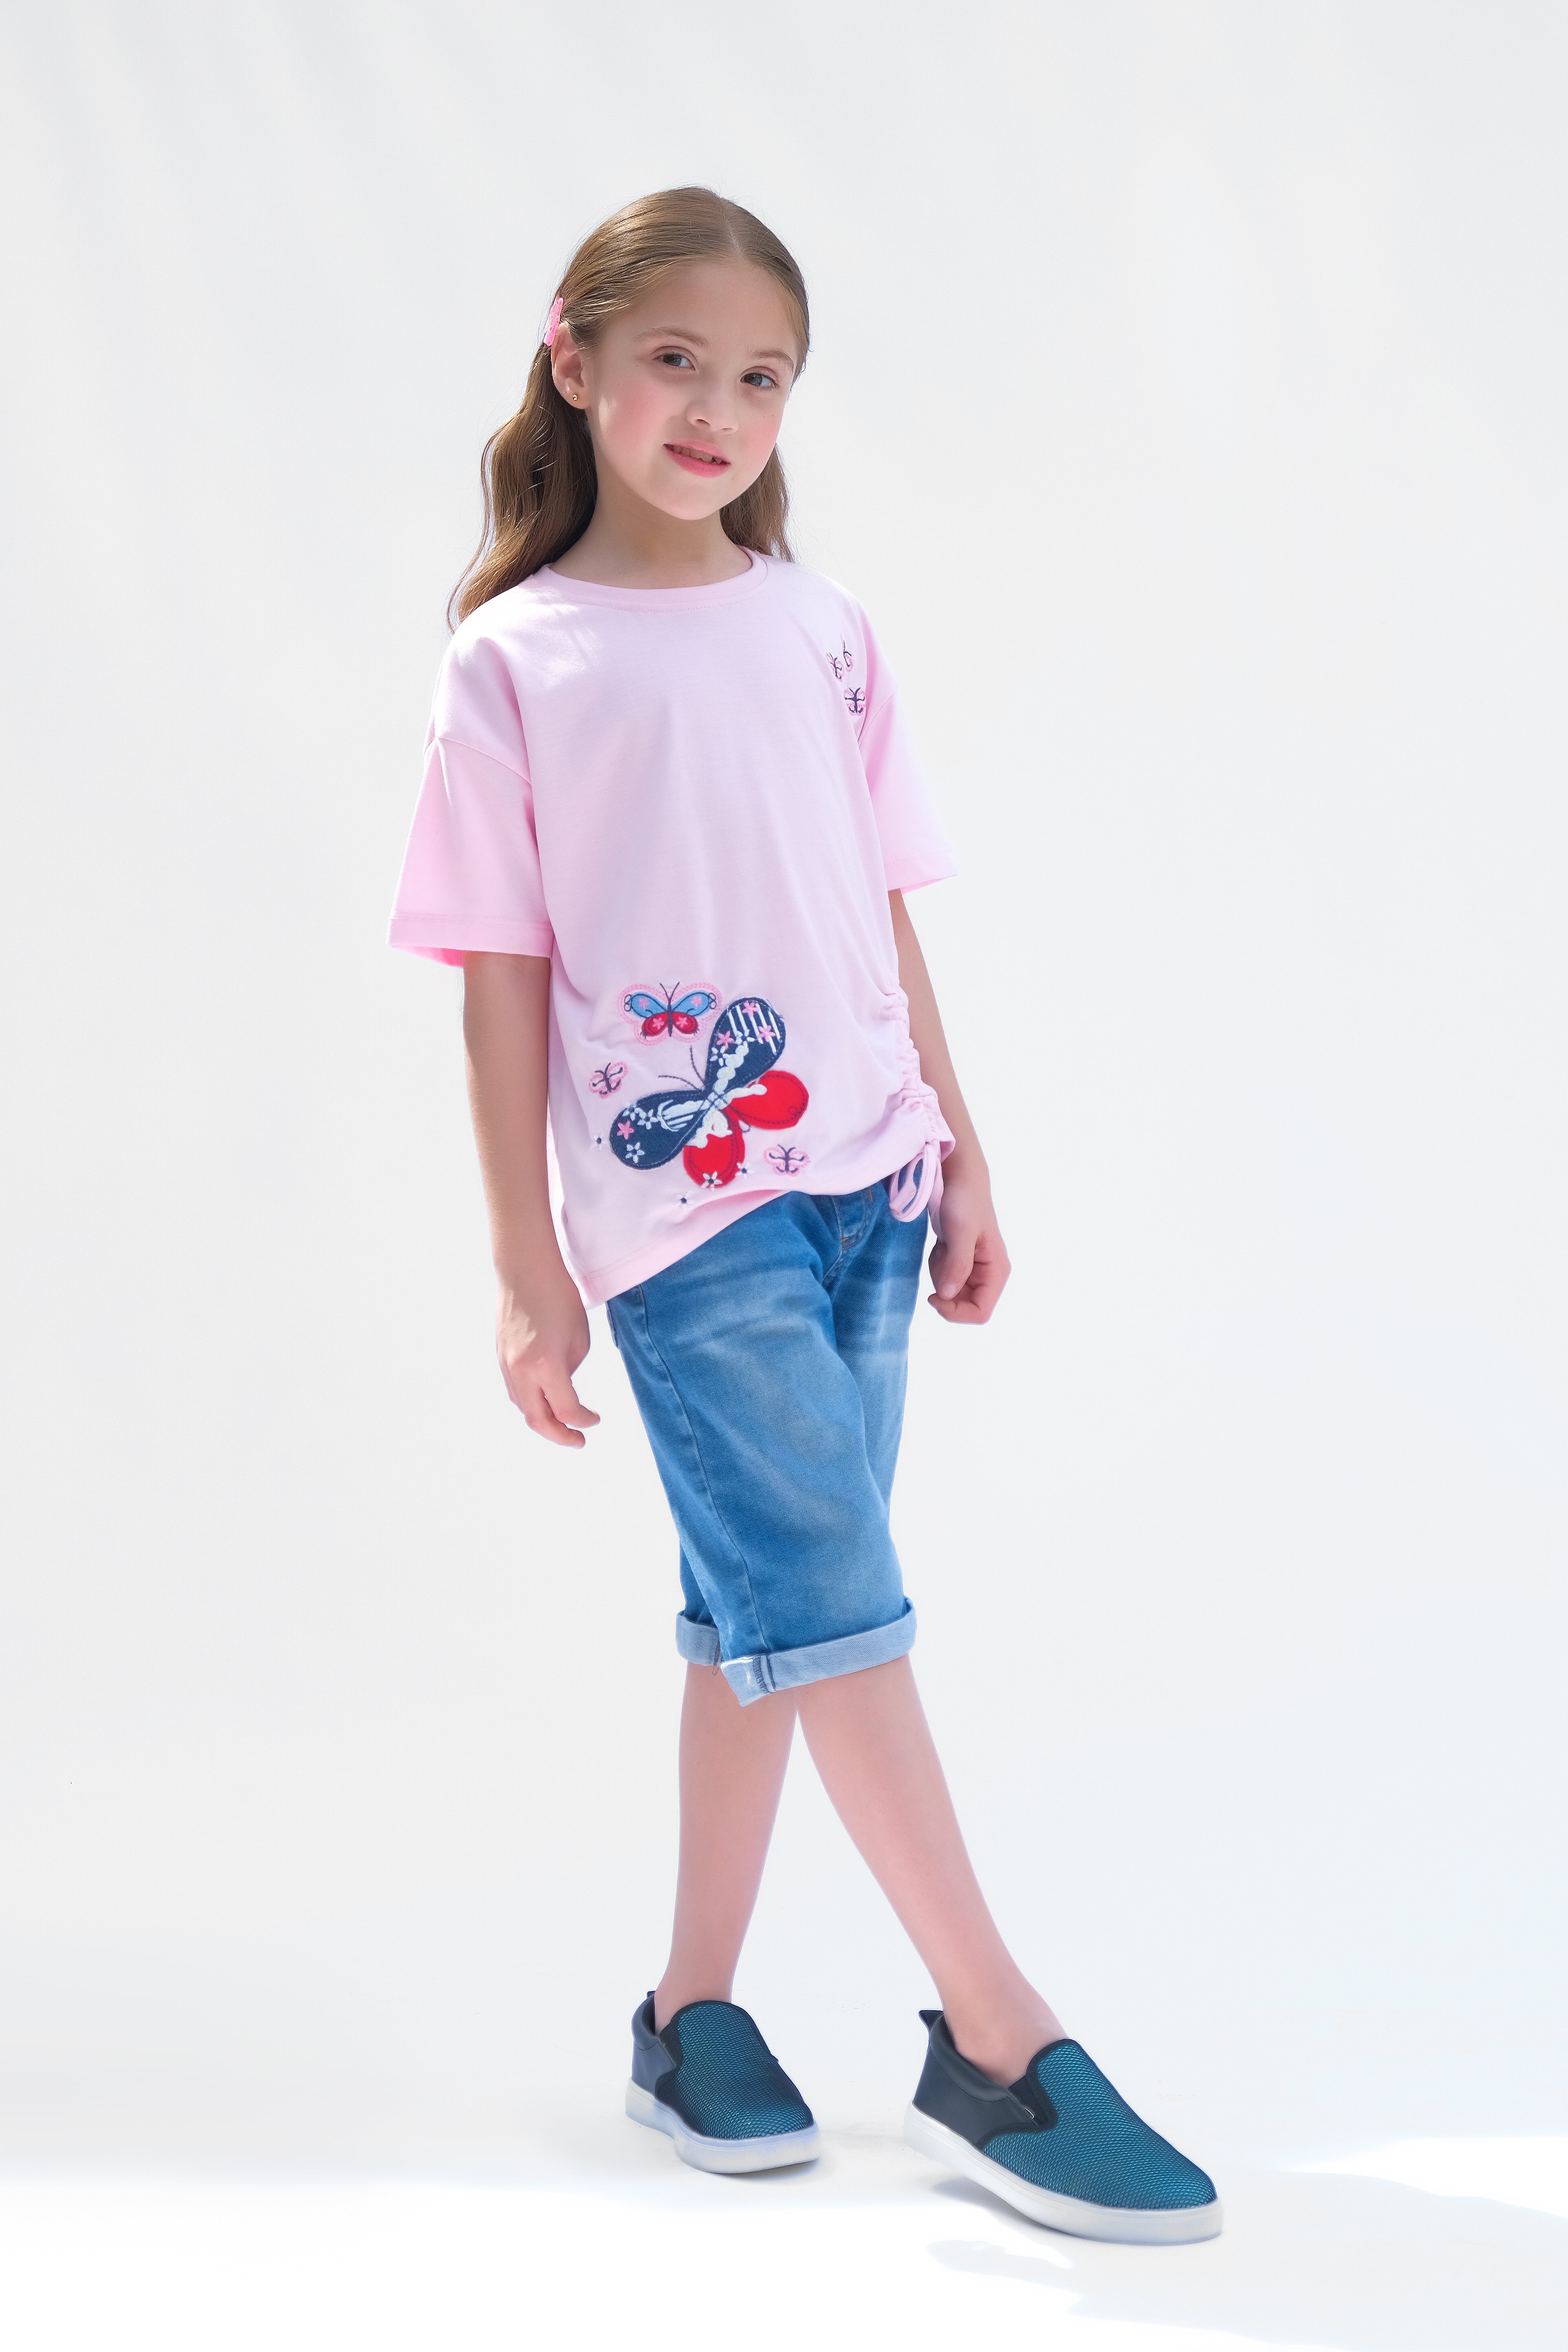 Butterfly with embroidery - Half sleeves T-shirts For Kids - Pink - SBT-362